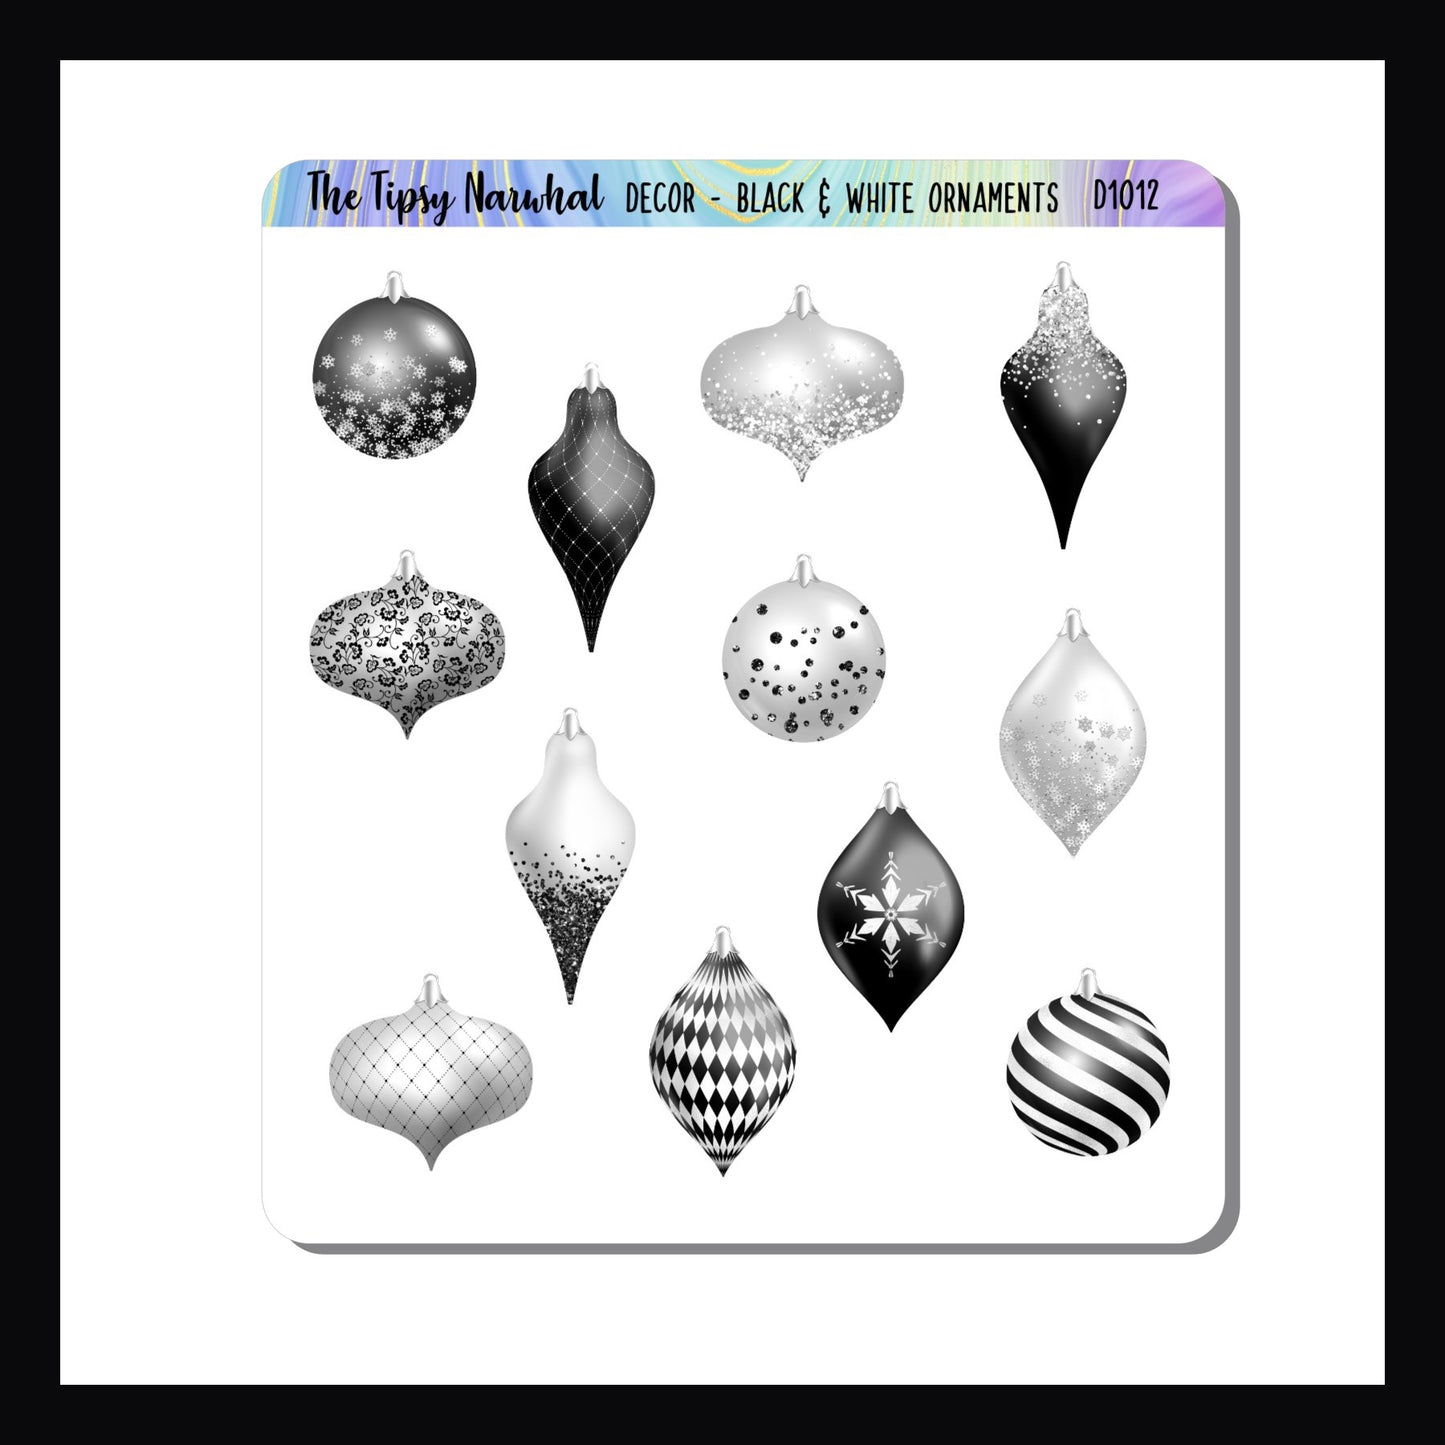 Black & White Ornament Sticker Sheet, holiday ornaments, christmas ornaments, black and white baubles, bulbs, christmas stickers, holiday stickers, festive stickers, snowflakes, glitter, sequins, 